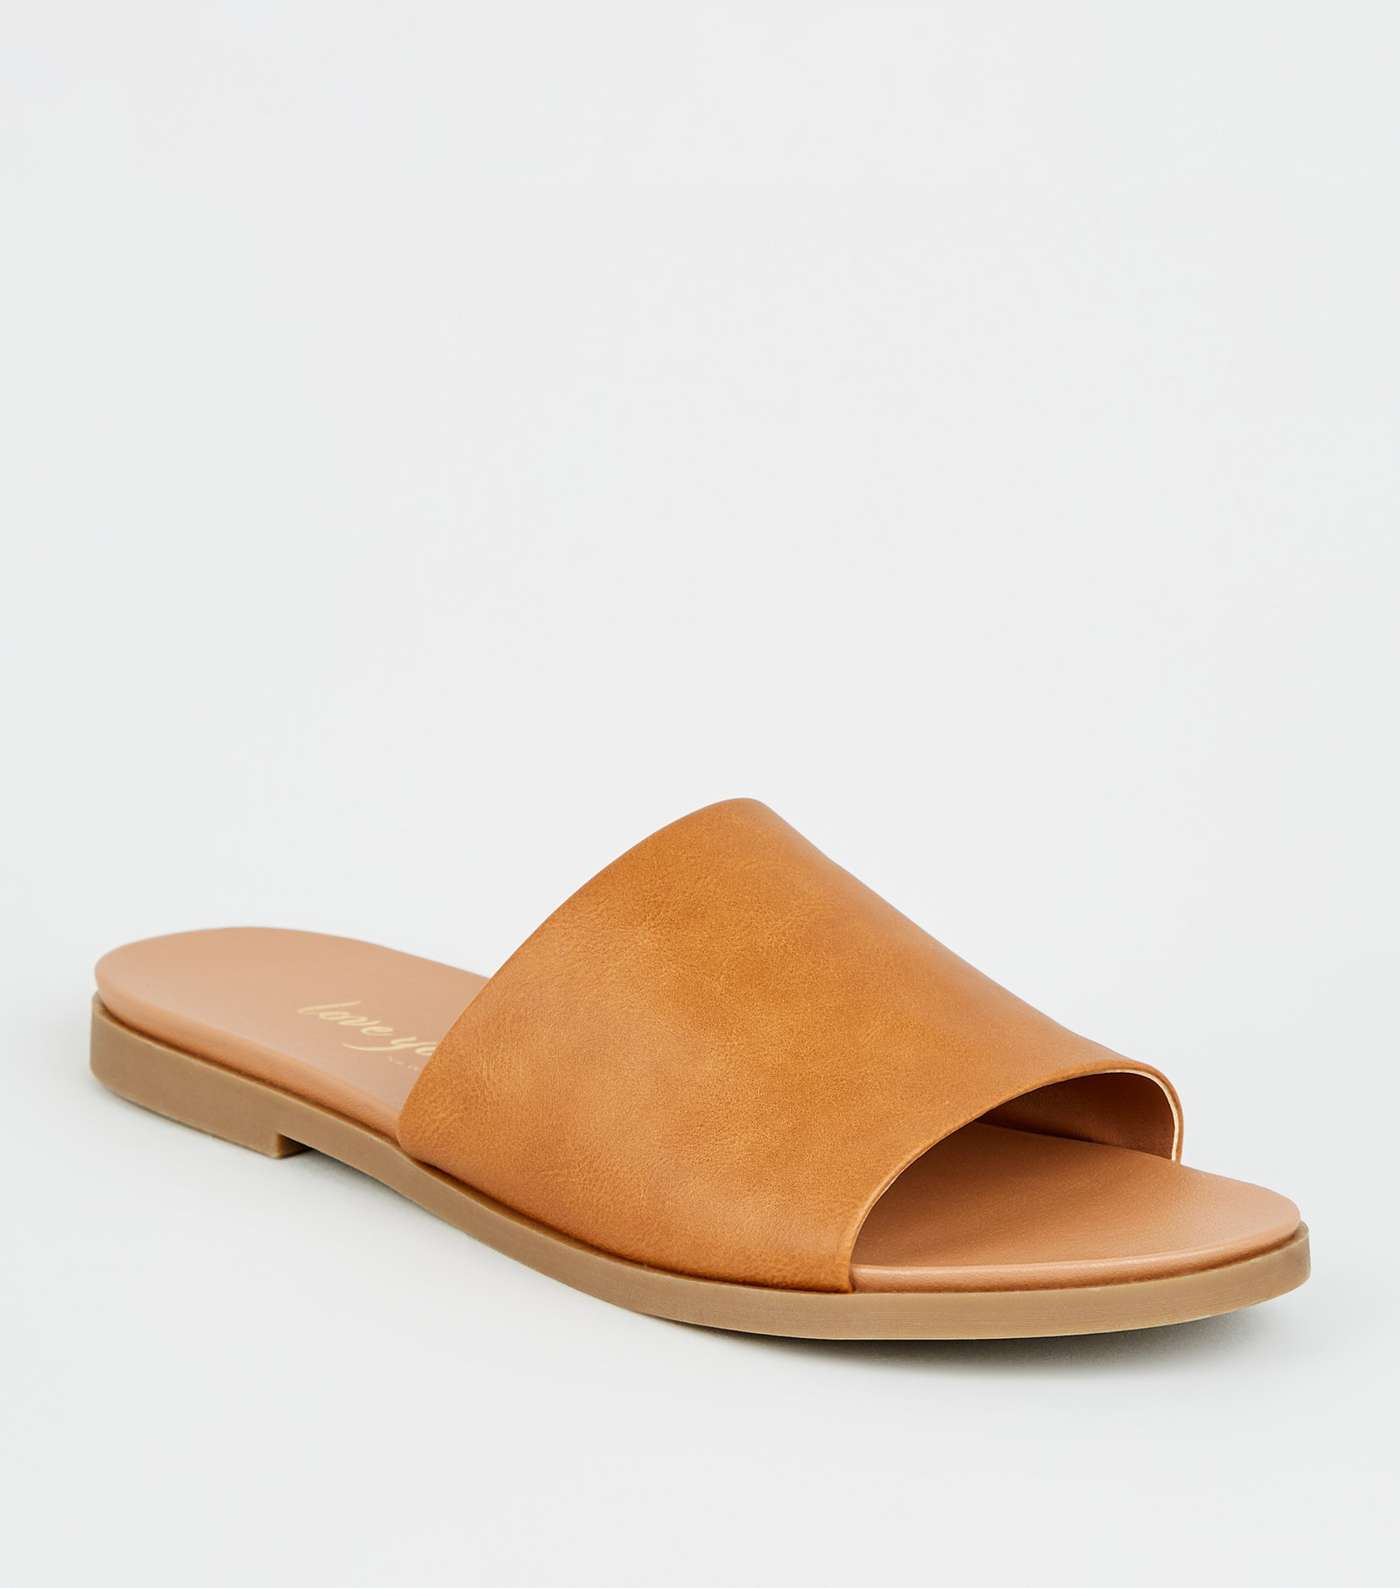 Tan Leather-Look Strap Footbed Sliders